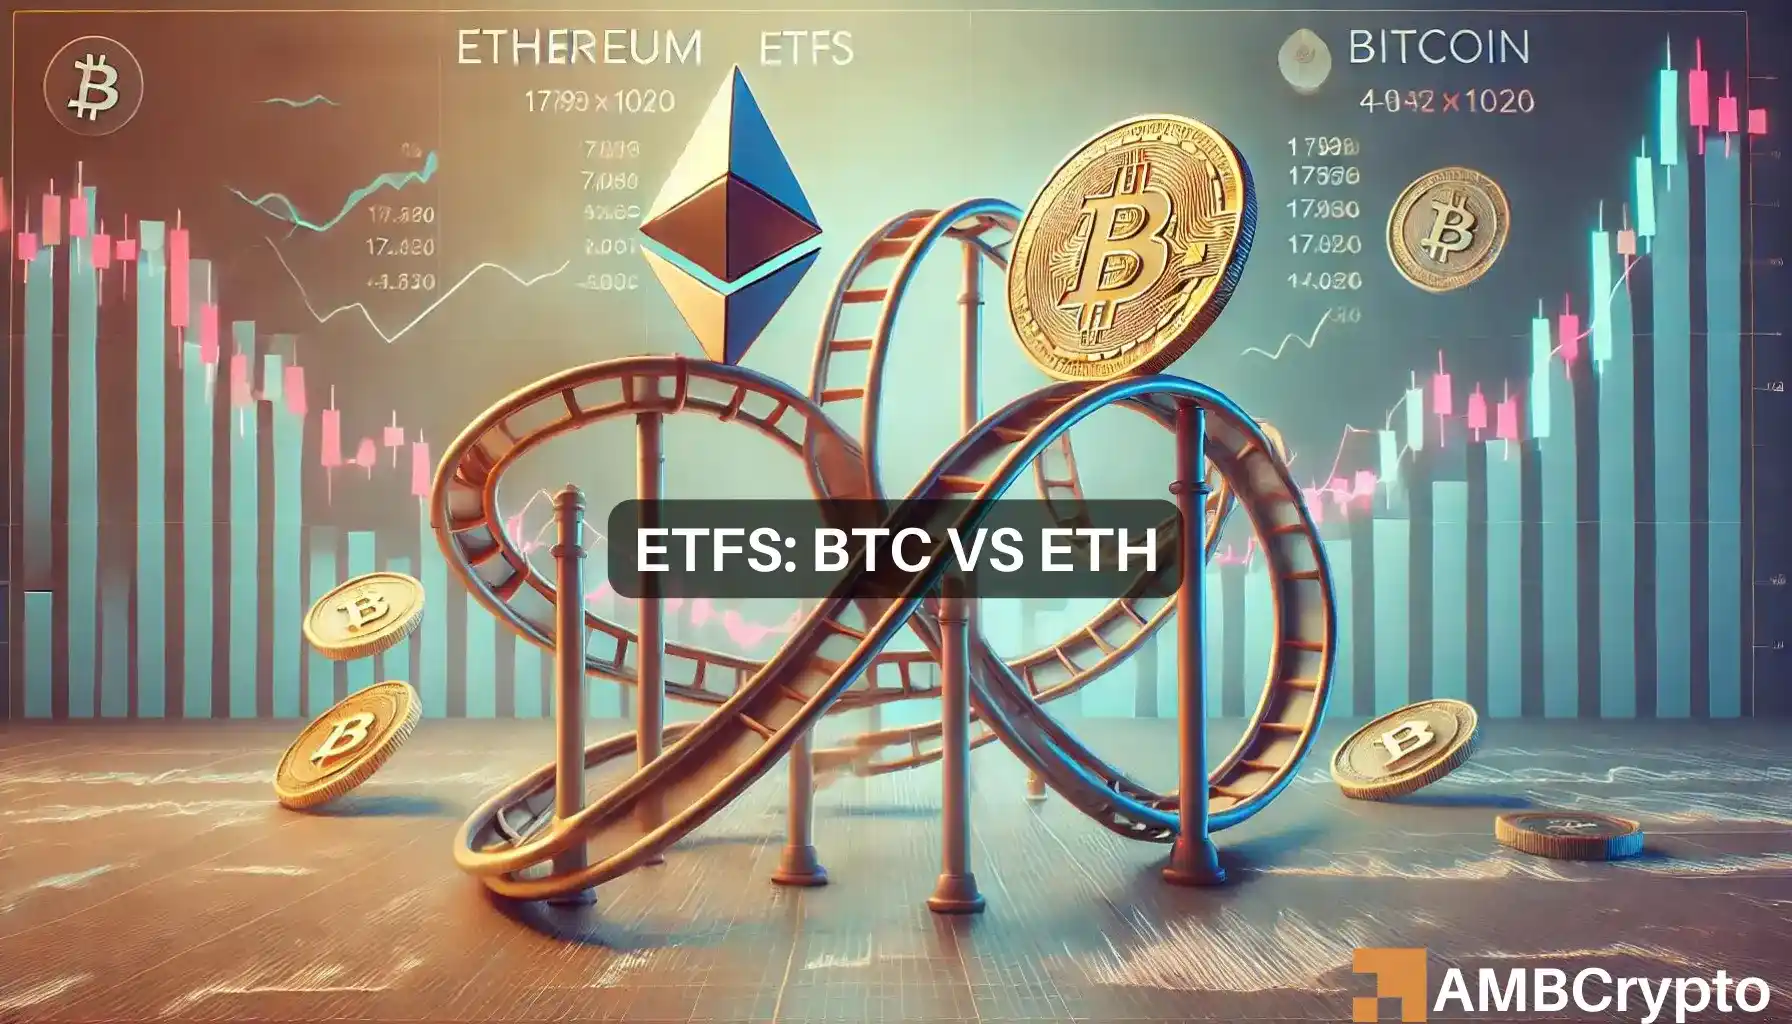 Ethereum ETFs vs. Bitcoin ETFs: Which one should you bet on?